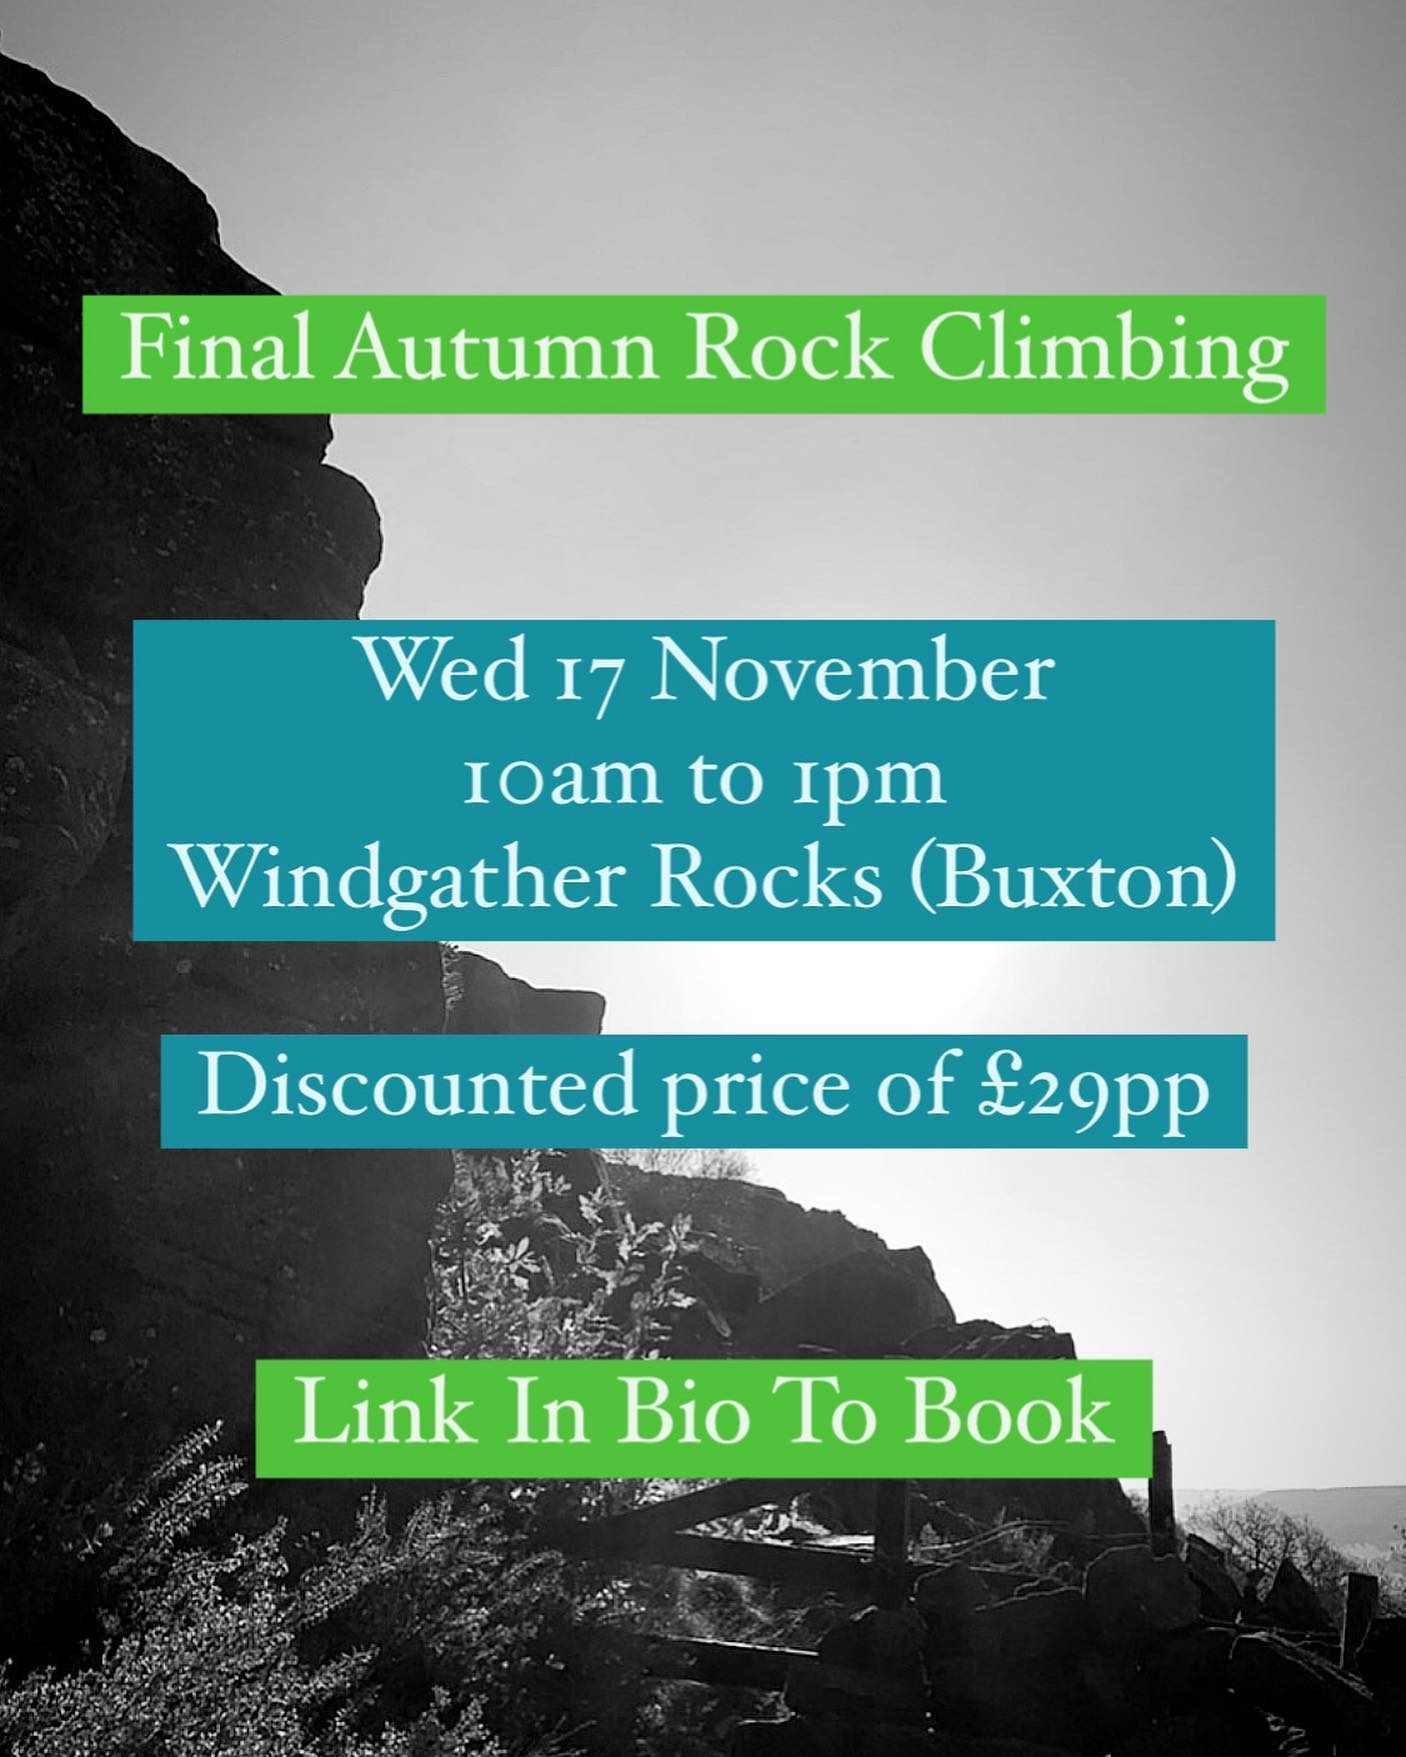 *THIS WEDNESDAY*

Join our friendly, qualified instructors for this session, just for fun or to learn some new skills, we hope to see you here!

More info and booking at www.wilderness-development.com, link in our bio 🧗‍♀️⛰🧗‍♀️
.
.
.
#wildernessdevelopment #smallbusiness #rockclimbing #climbing #scrambling #abseiling #trysomethingnew #peakdistrict #peakdistrictnationalpark #peakdistrictclimbing #mountainsfellsandhikes #roamtheuk #outdoorpursuits #outdooradventures #outdooractivities #nationalparksuk #booknow